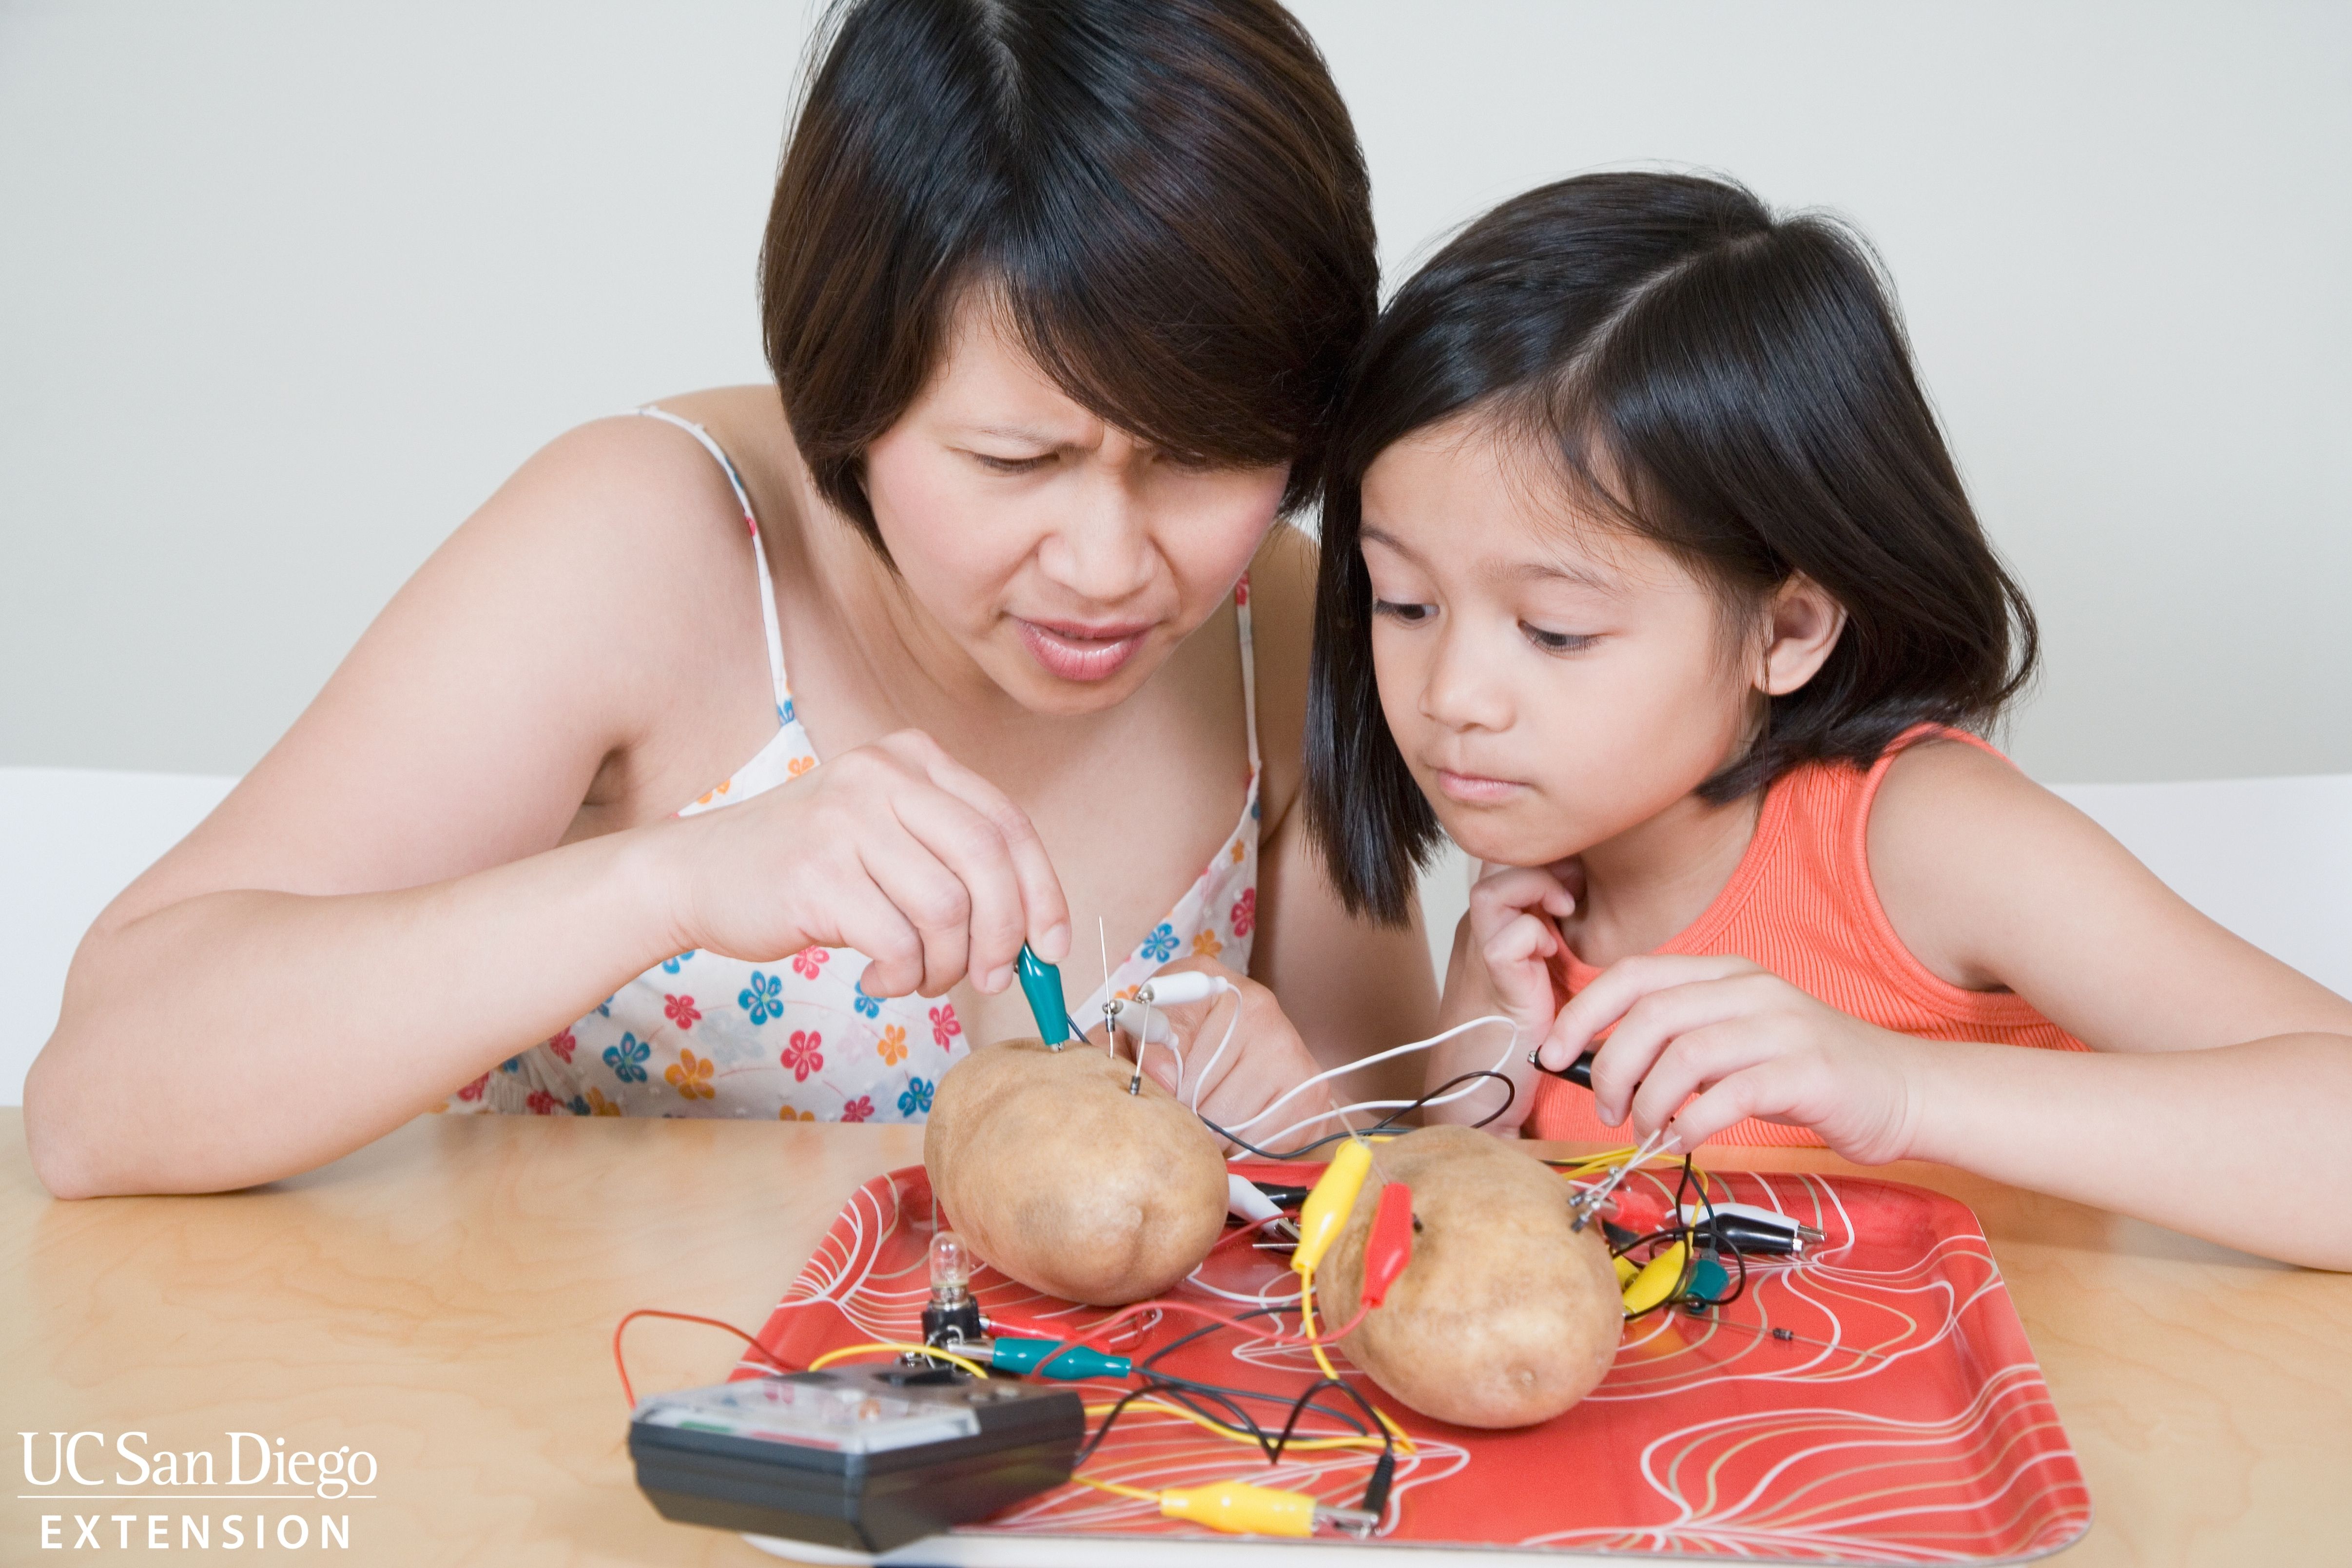 Parent and child conducting experiment with vegetables and wires